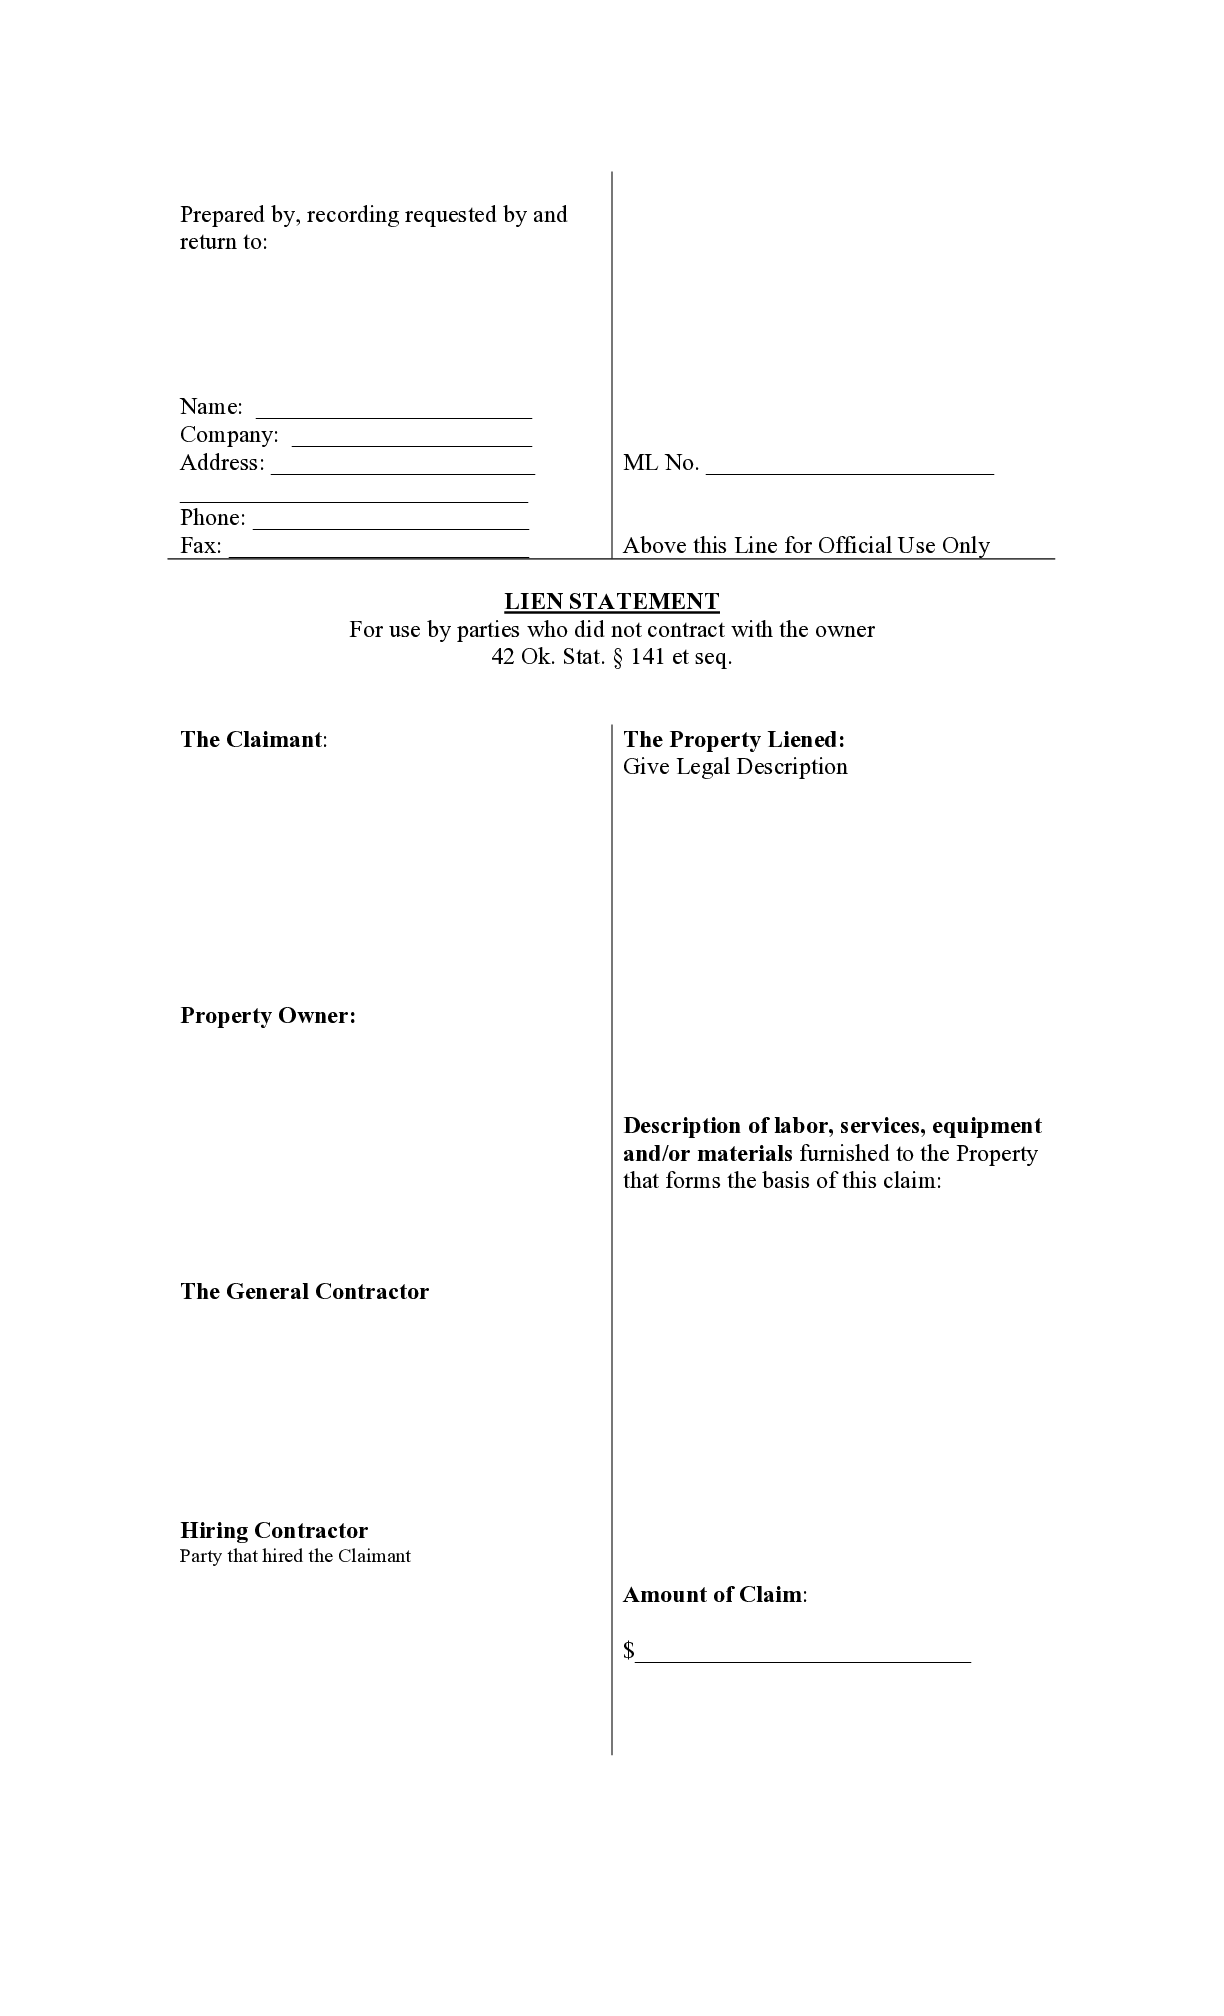 Oklahoma Sub Lien Non-Residential Form - free from